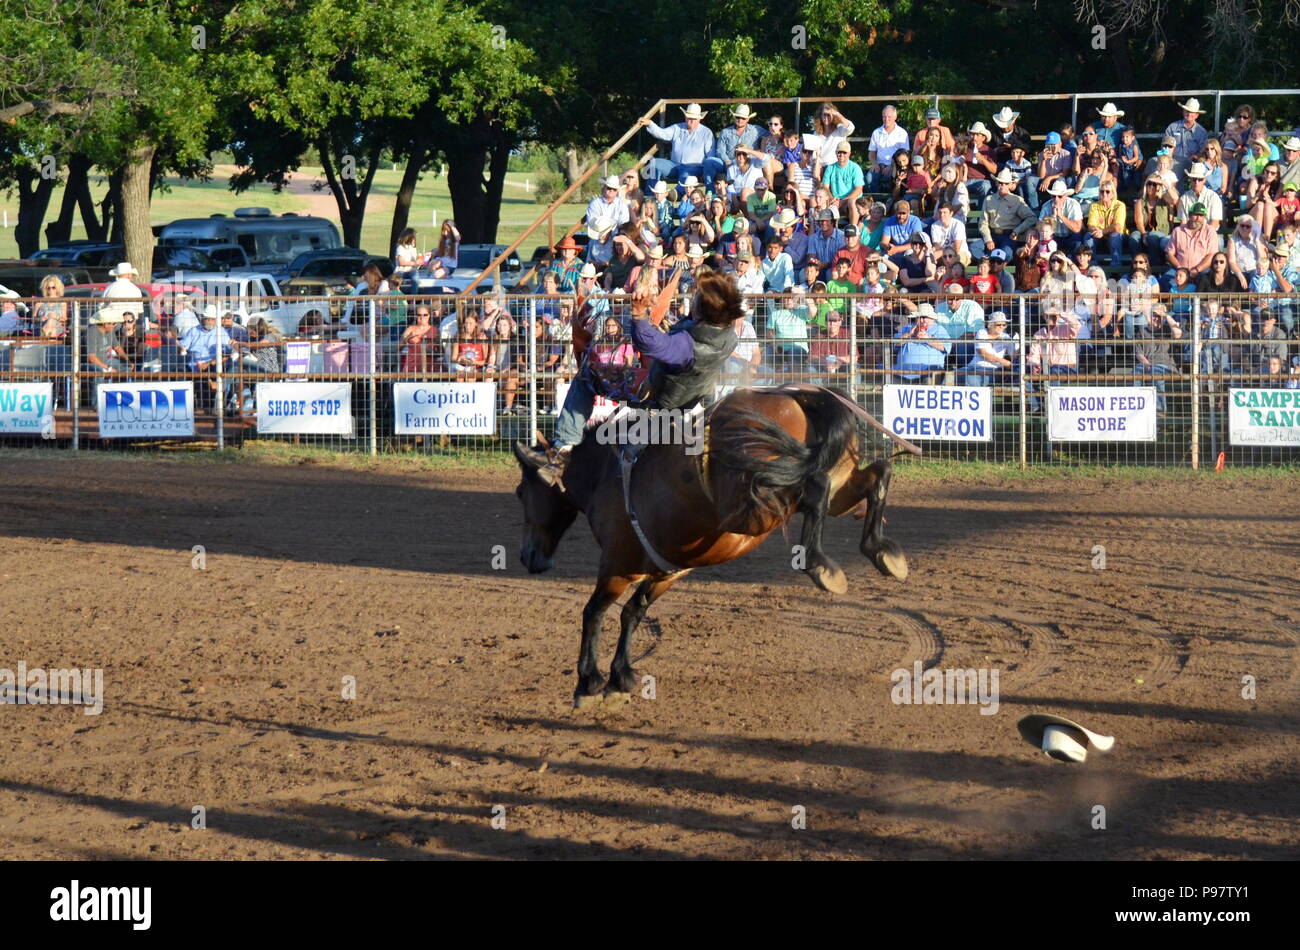 Bronc Busting at the Mason County Rodeo Stock Photo